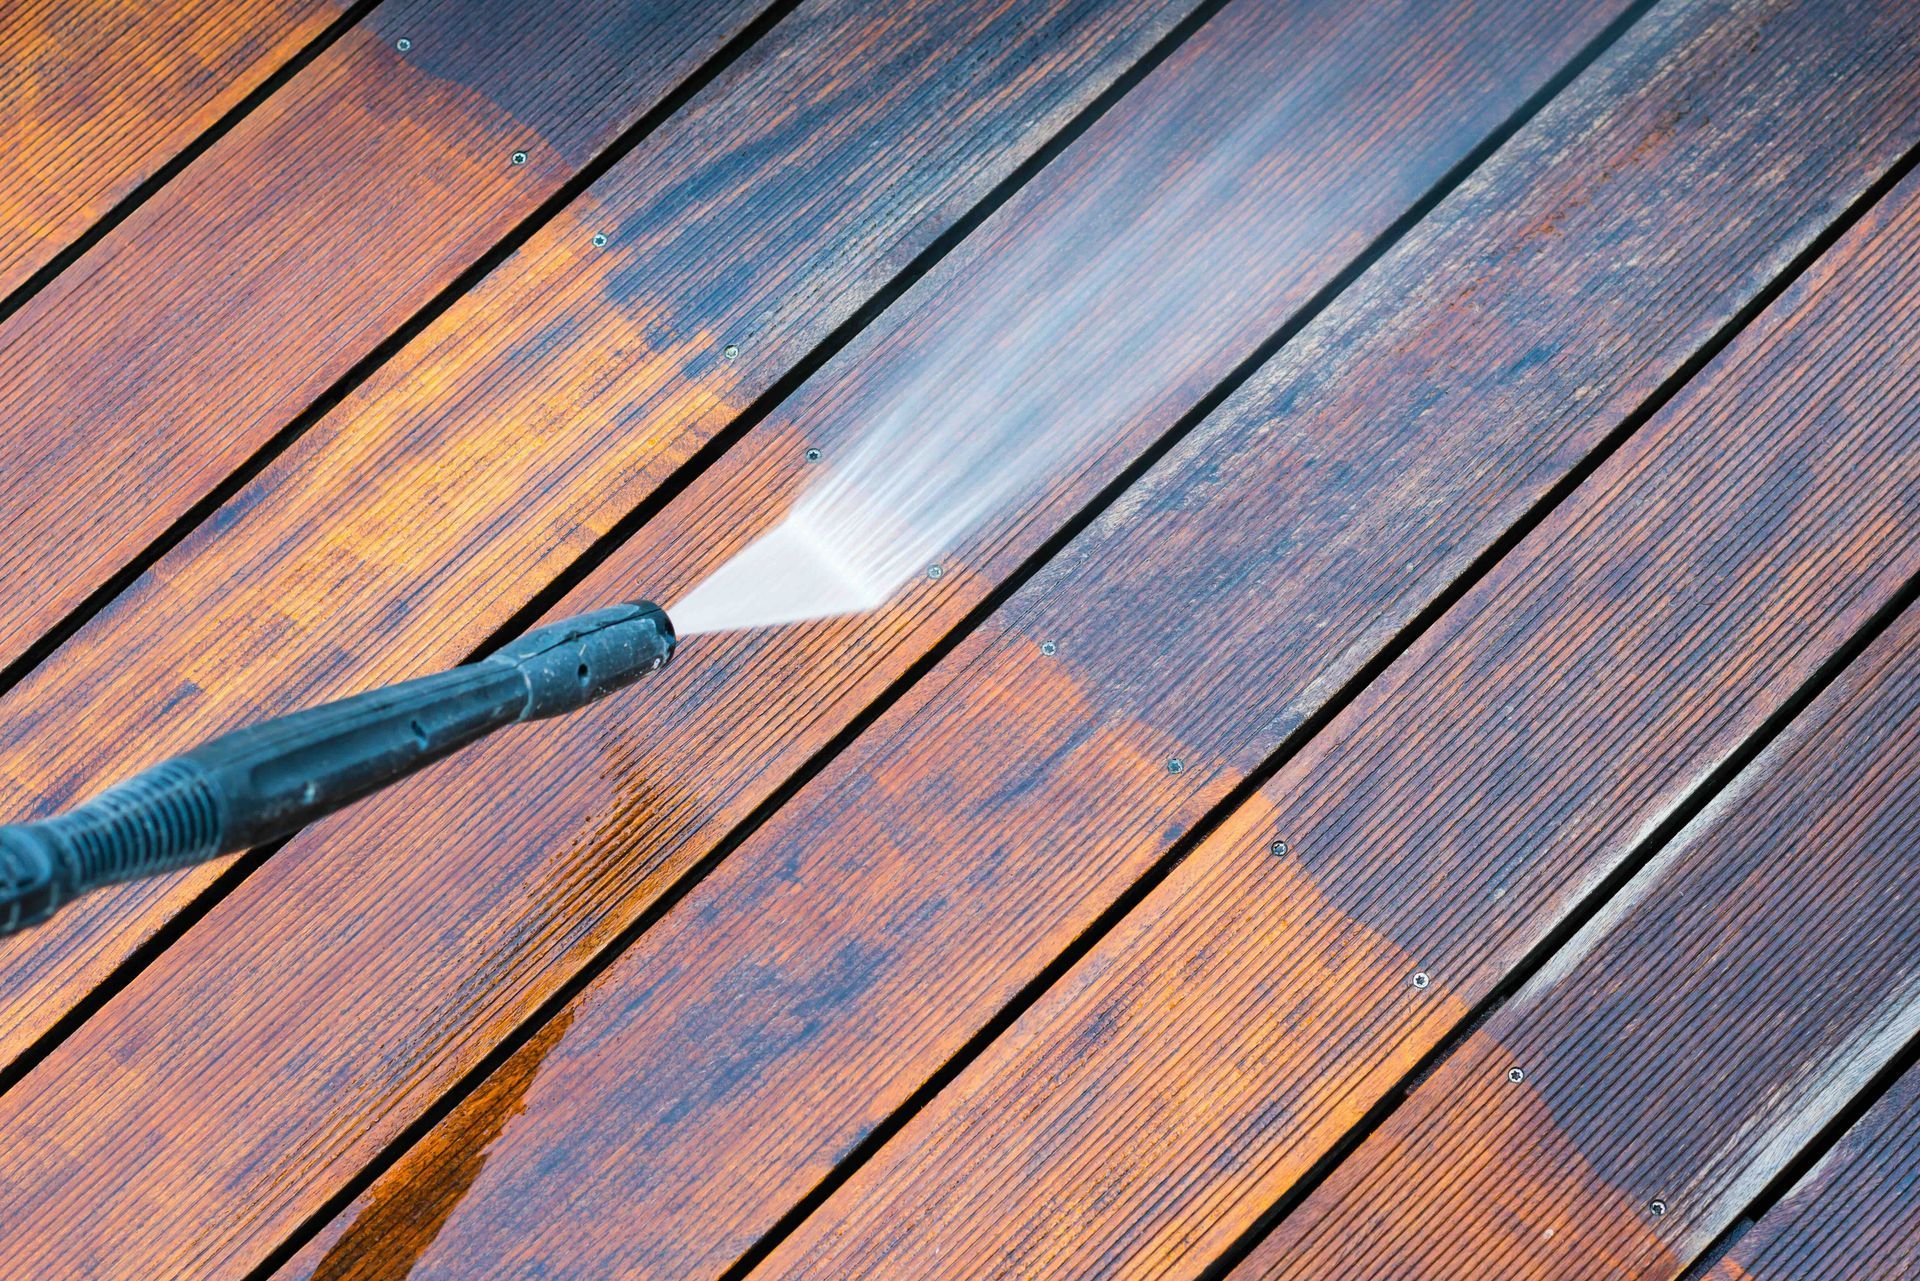 A person is using a high pressure washer to clean a wooden deck.